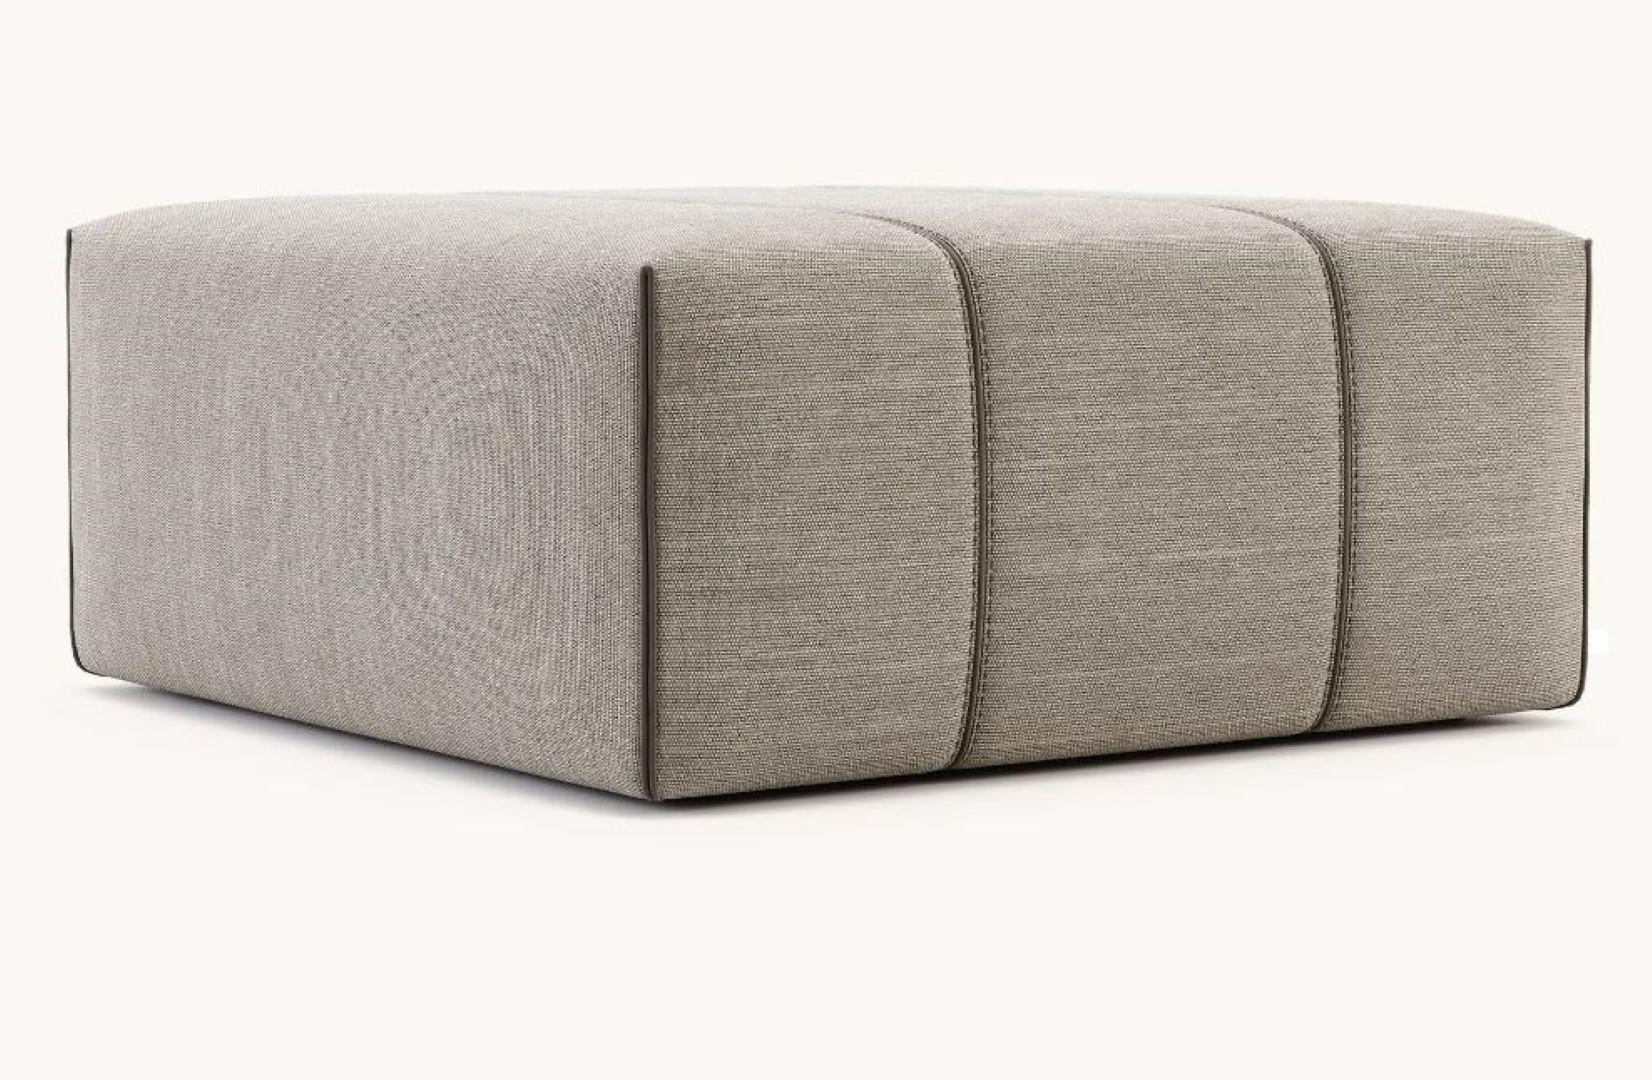 Grant L Pouf by Domkapa
Materials: Fiber. 
Dimensions: W 94 x D 94 x H 40 cm. 
Also available in different materials.

The construction of Grant pouf skillfully combines aesthetics and ergonomics to establish this as the go-to solution for